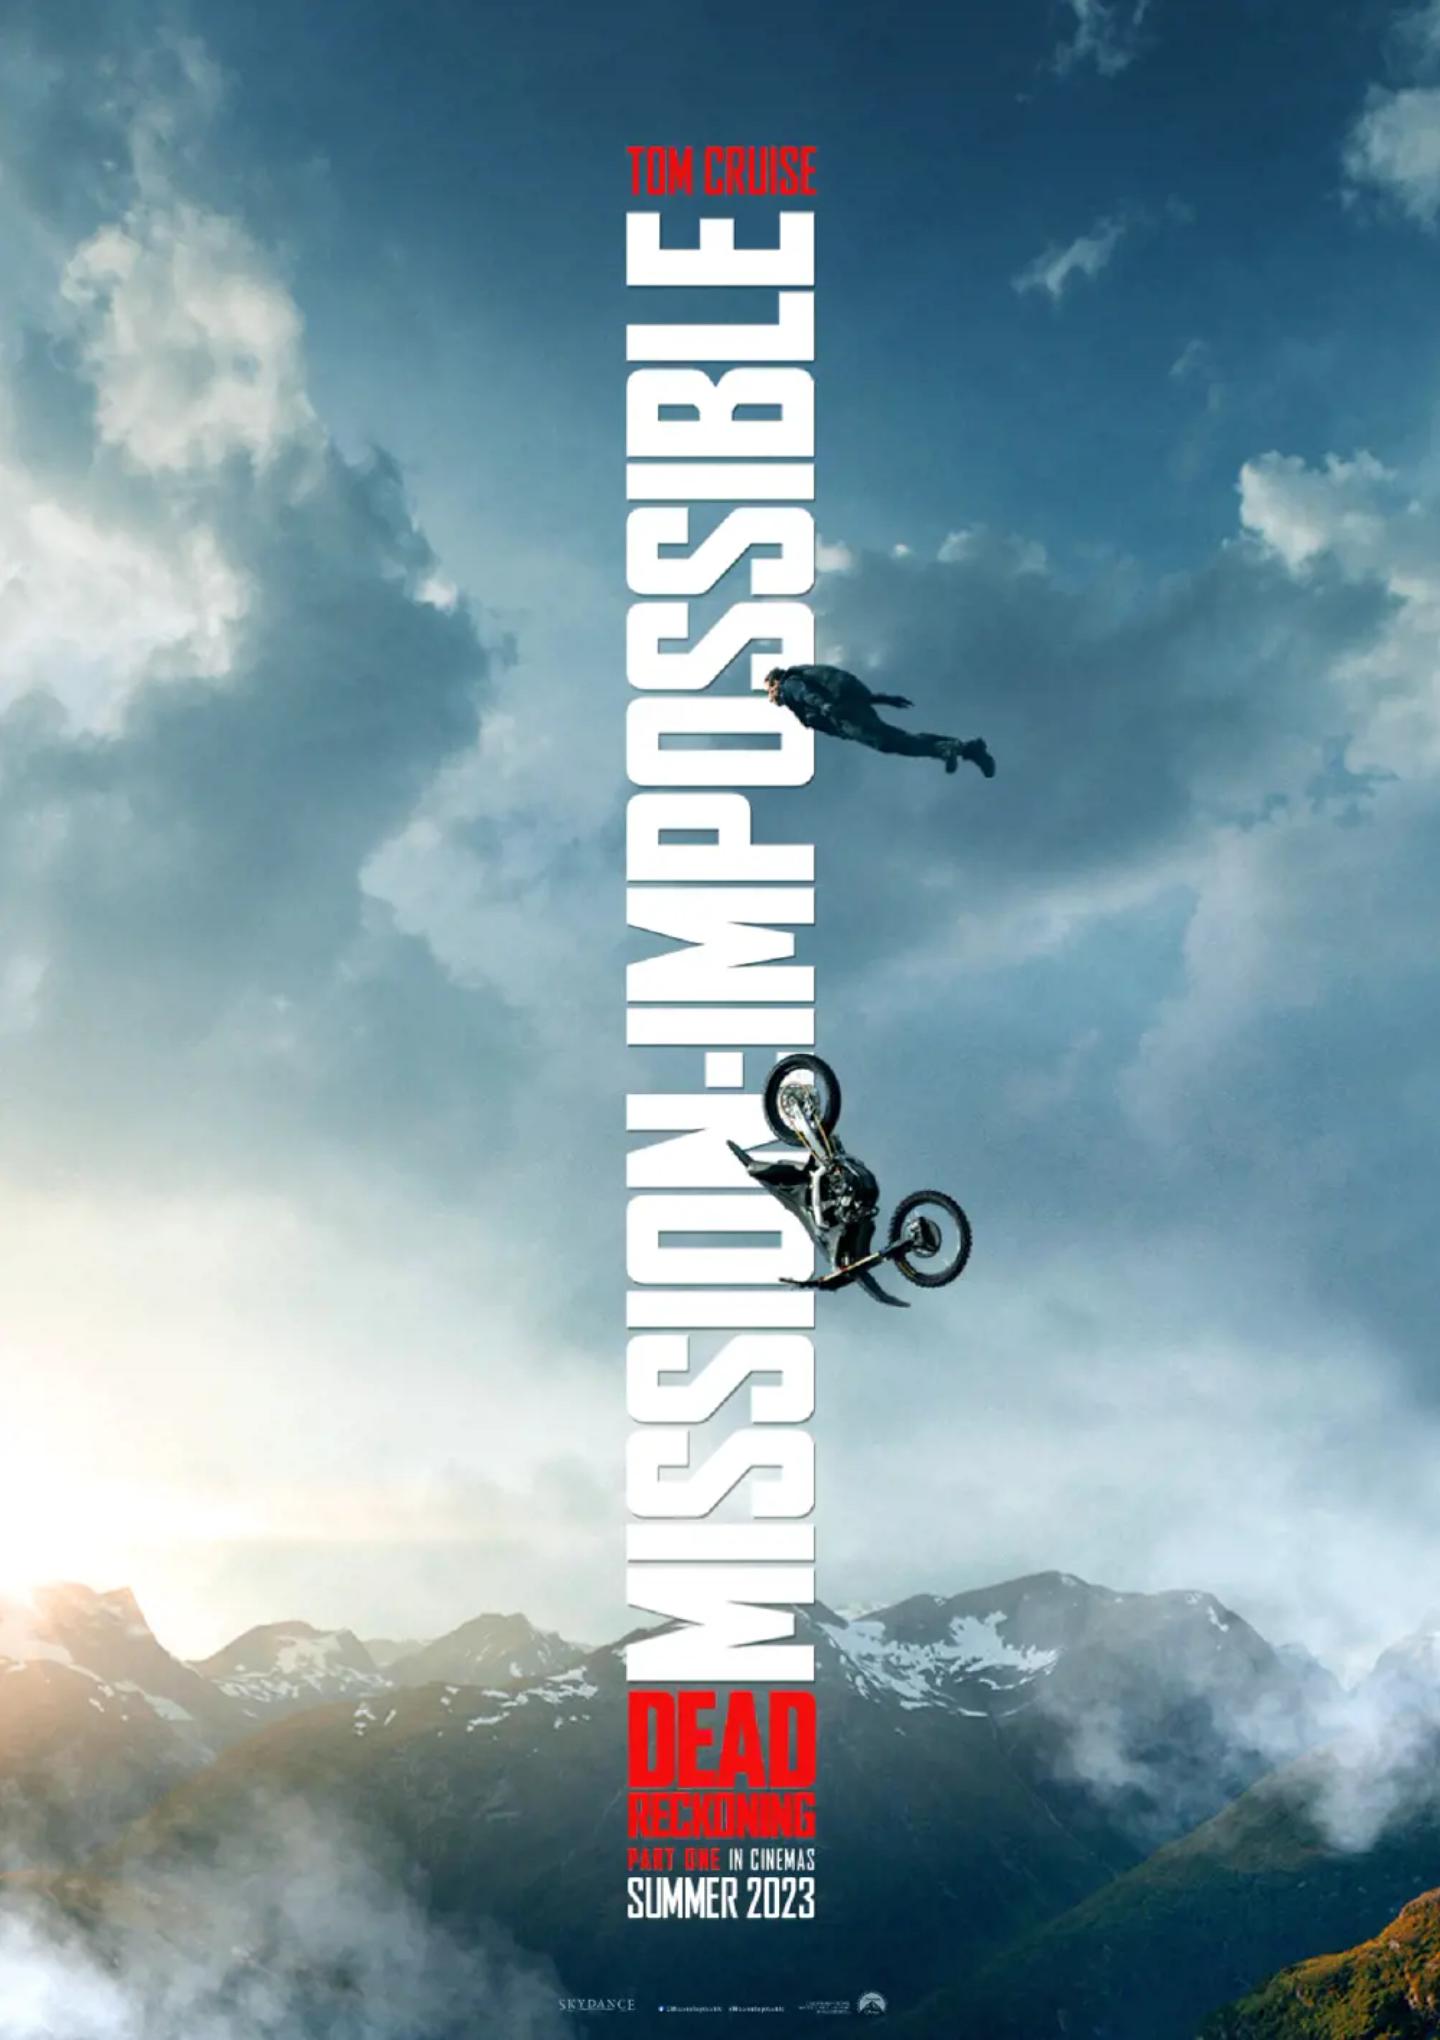 Plakat for 'Mission: Impossible - Dead Reckoning - Part One'